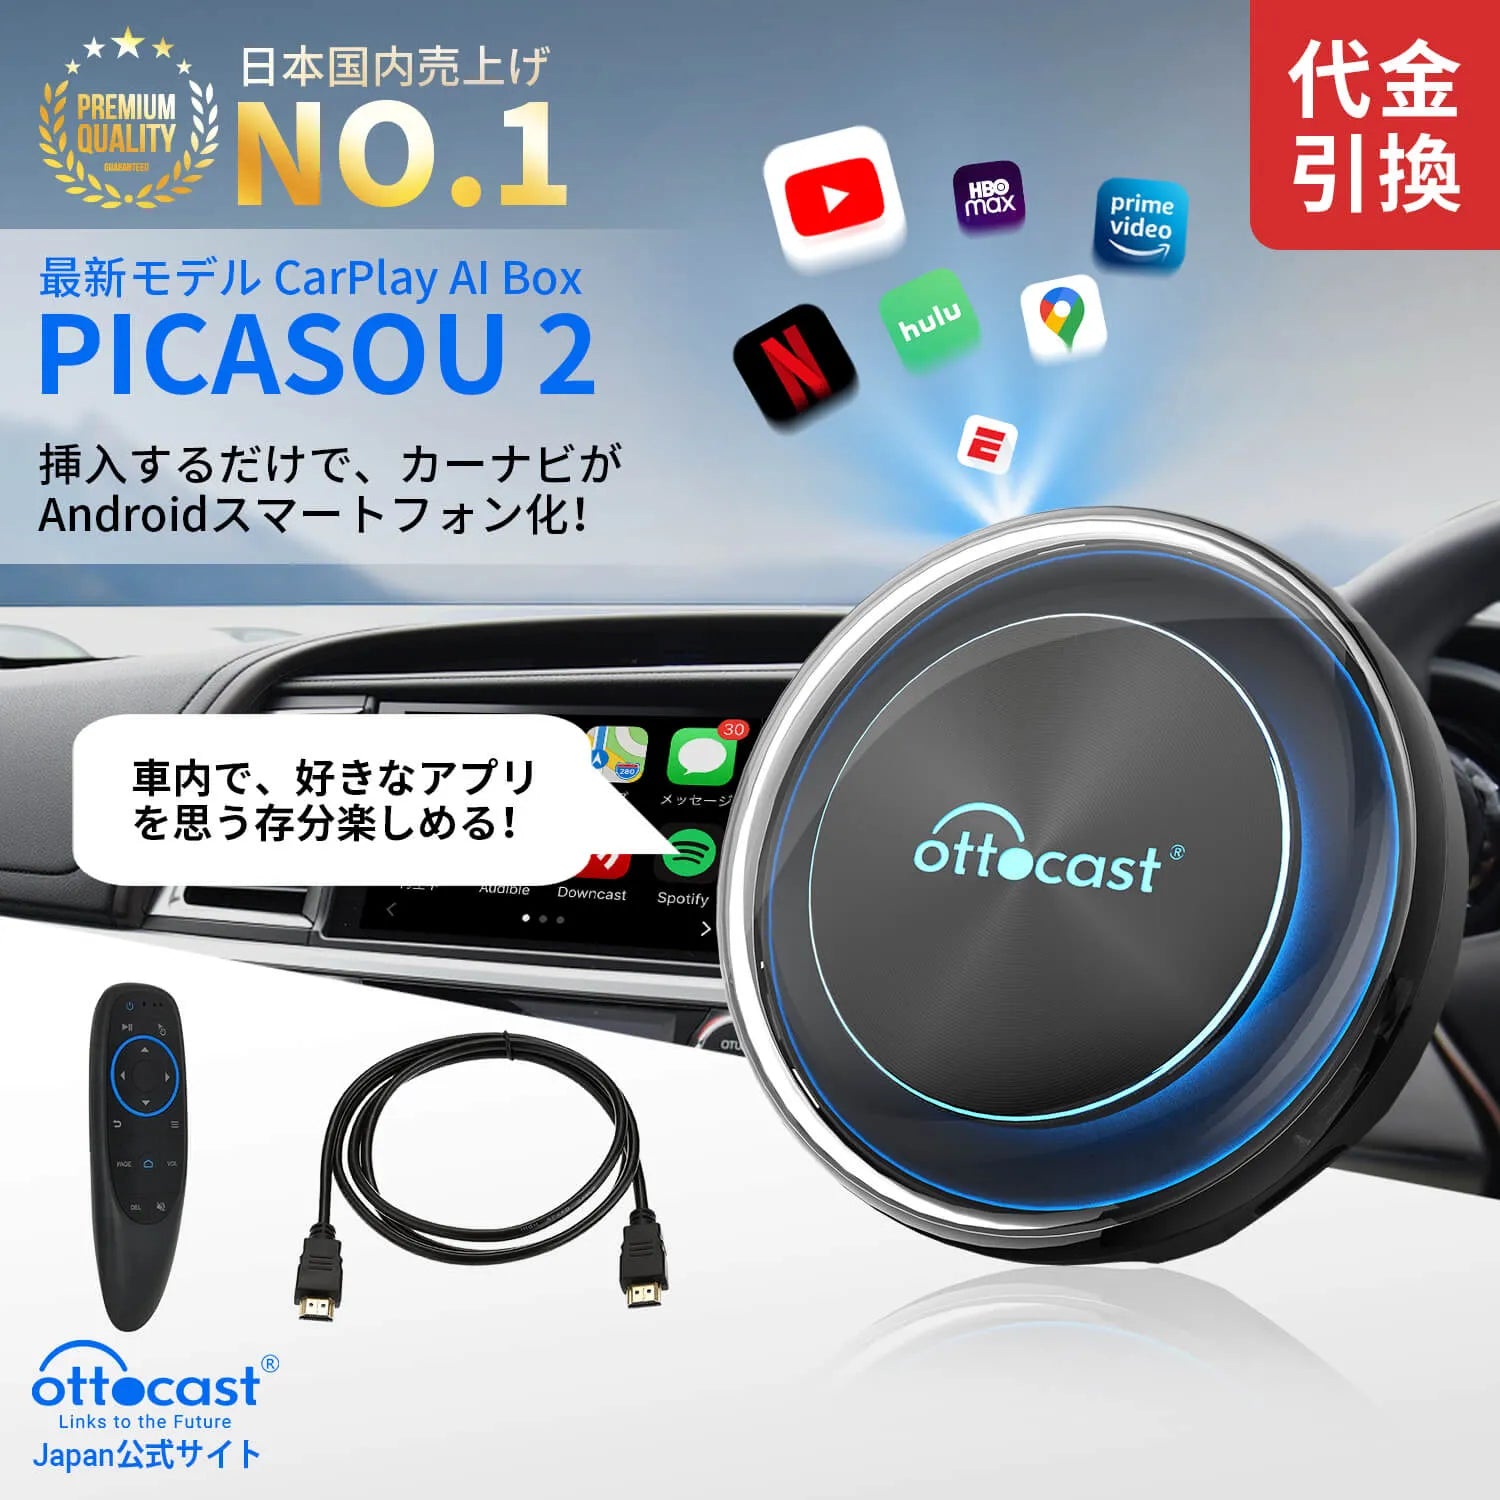 Ottocast PICASOU2　オットキャスト購入させて頂きます